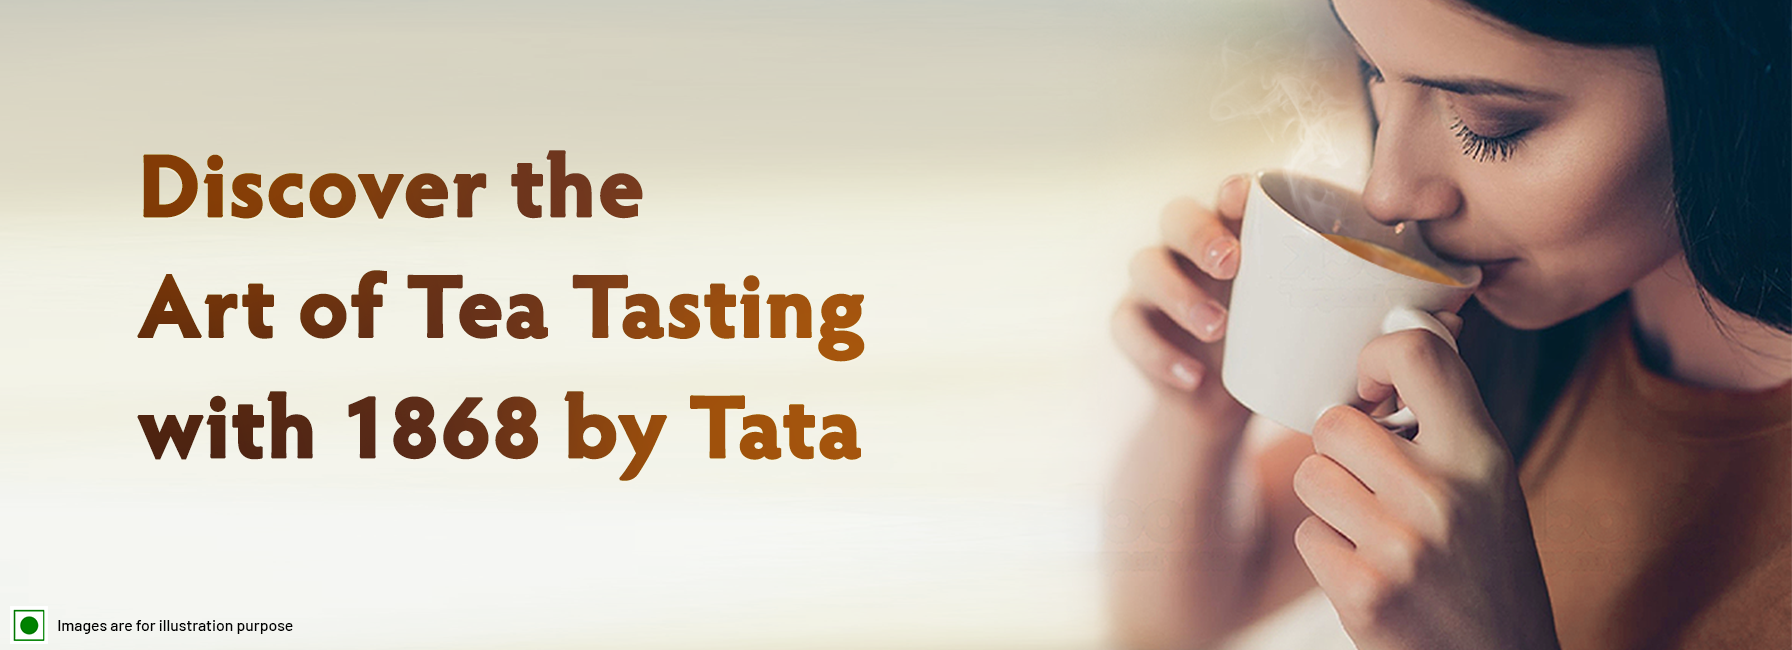 Discover the Art of Tea Tasting with 1868 by Tata Tea